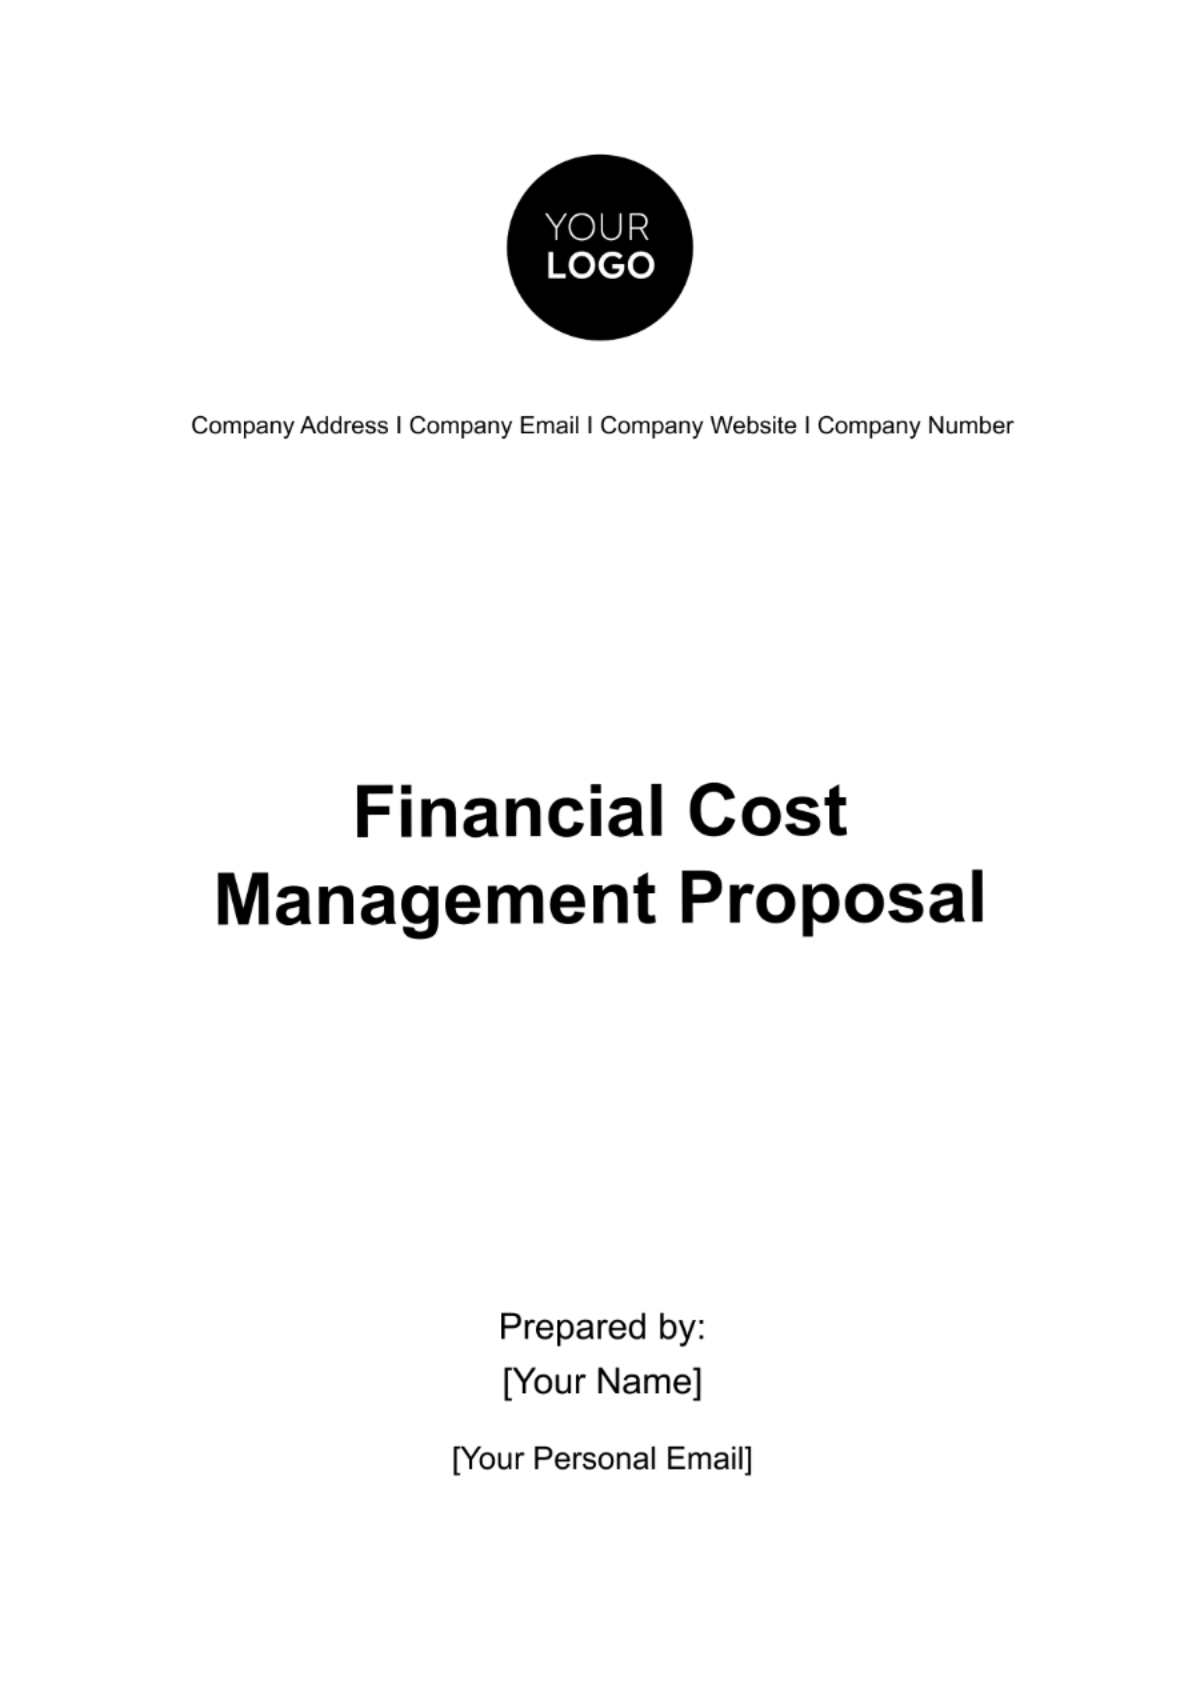 Financial Cost Management Proposal Template